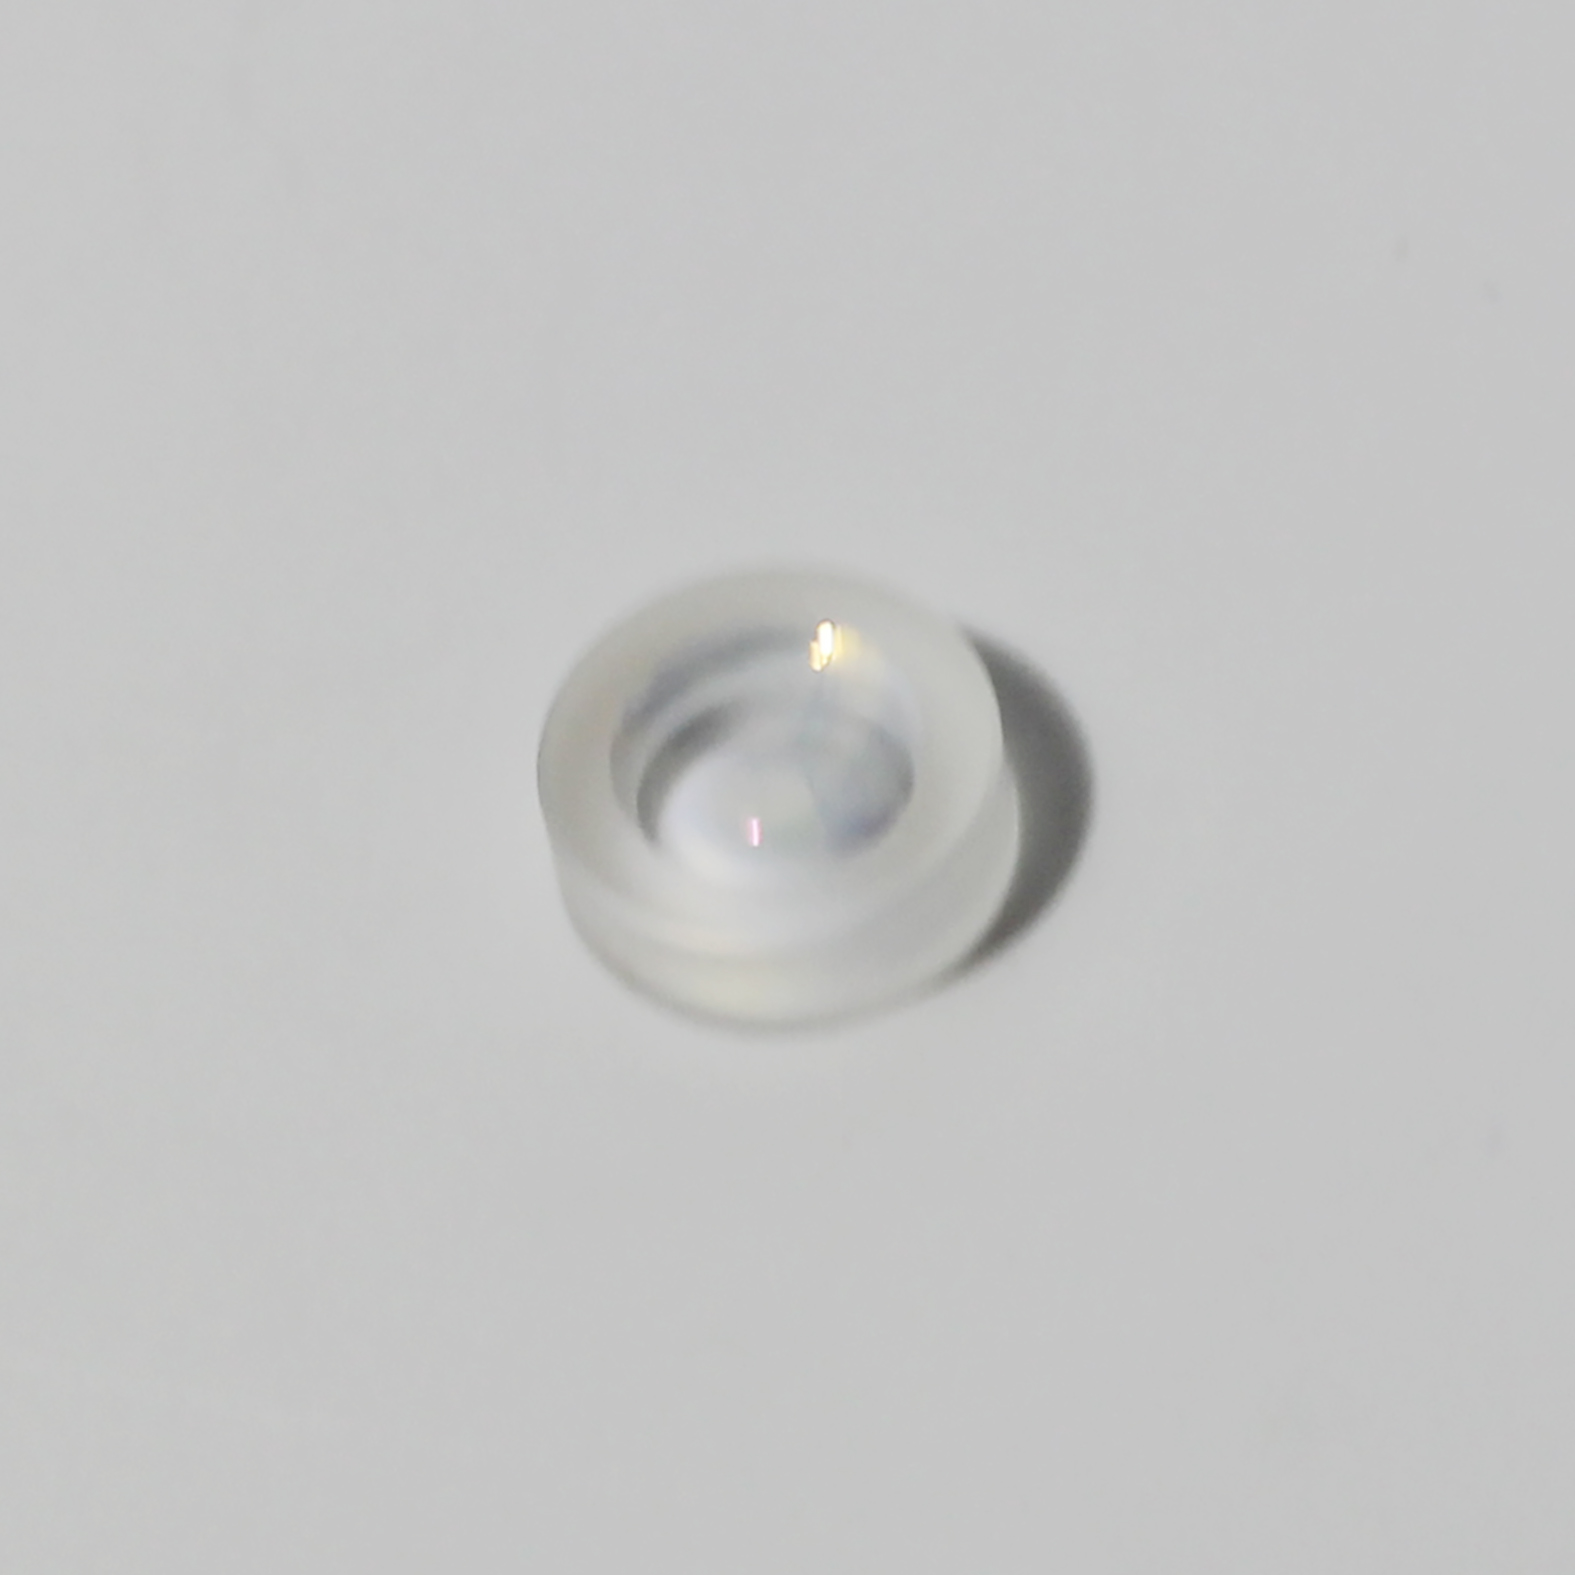 China High Quality BK7 Glass Double Concave Biconcave Spherical Lens